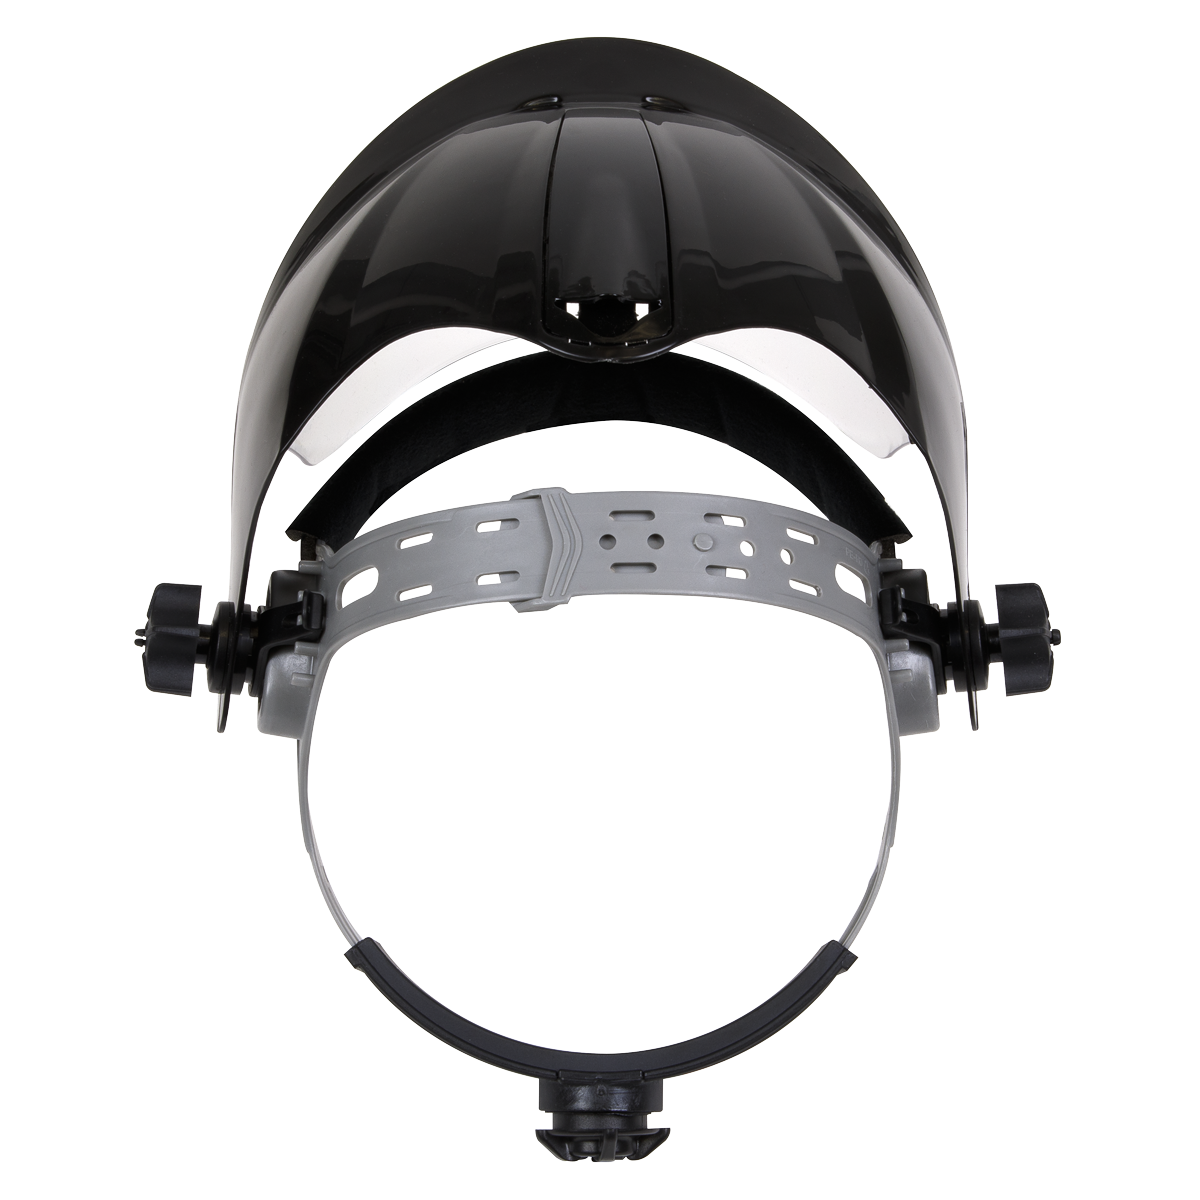 Deluxe Brow Guard with Aspherical Polycarbonate Full Face Shield